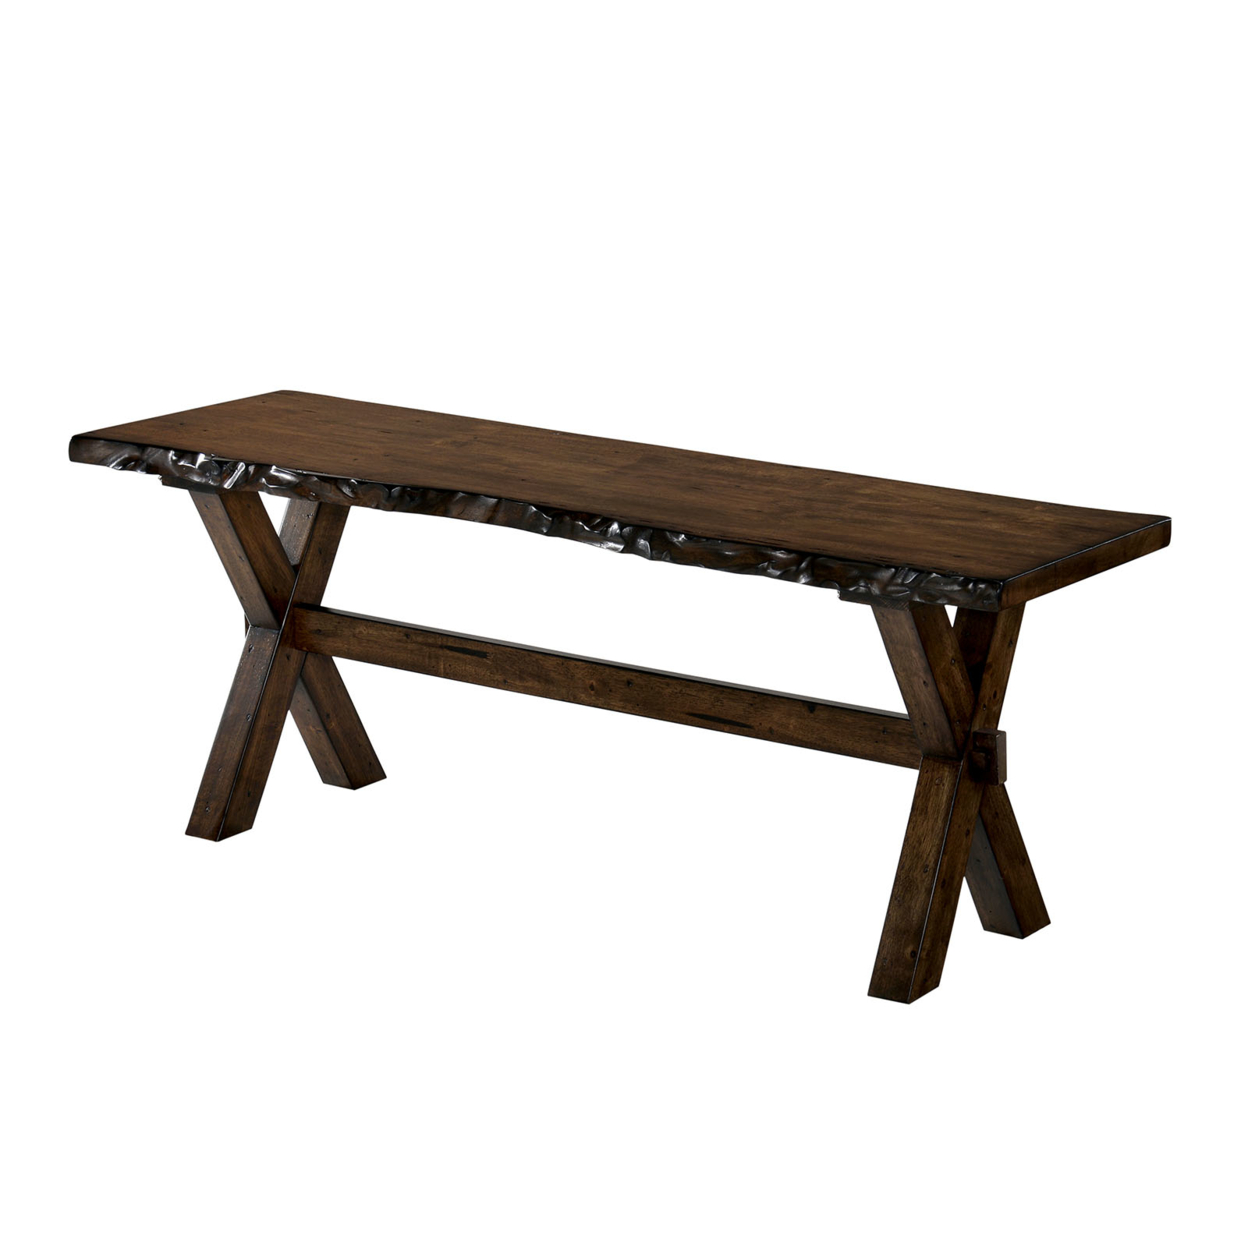 Transitional Style Solid Wood Bench With Trestle Base And Cross Legs , Brown- Saltoro Sherpi